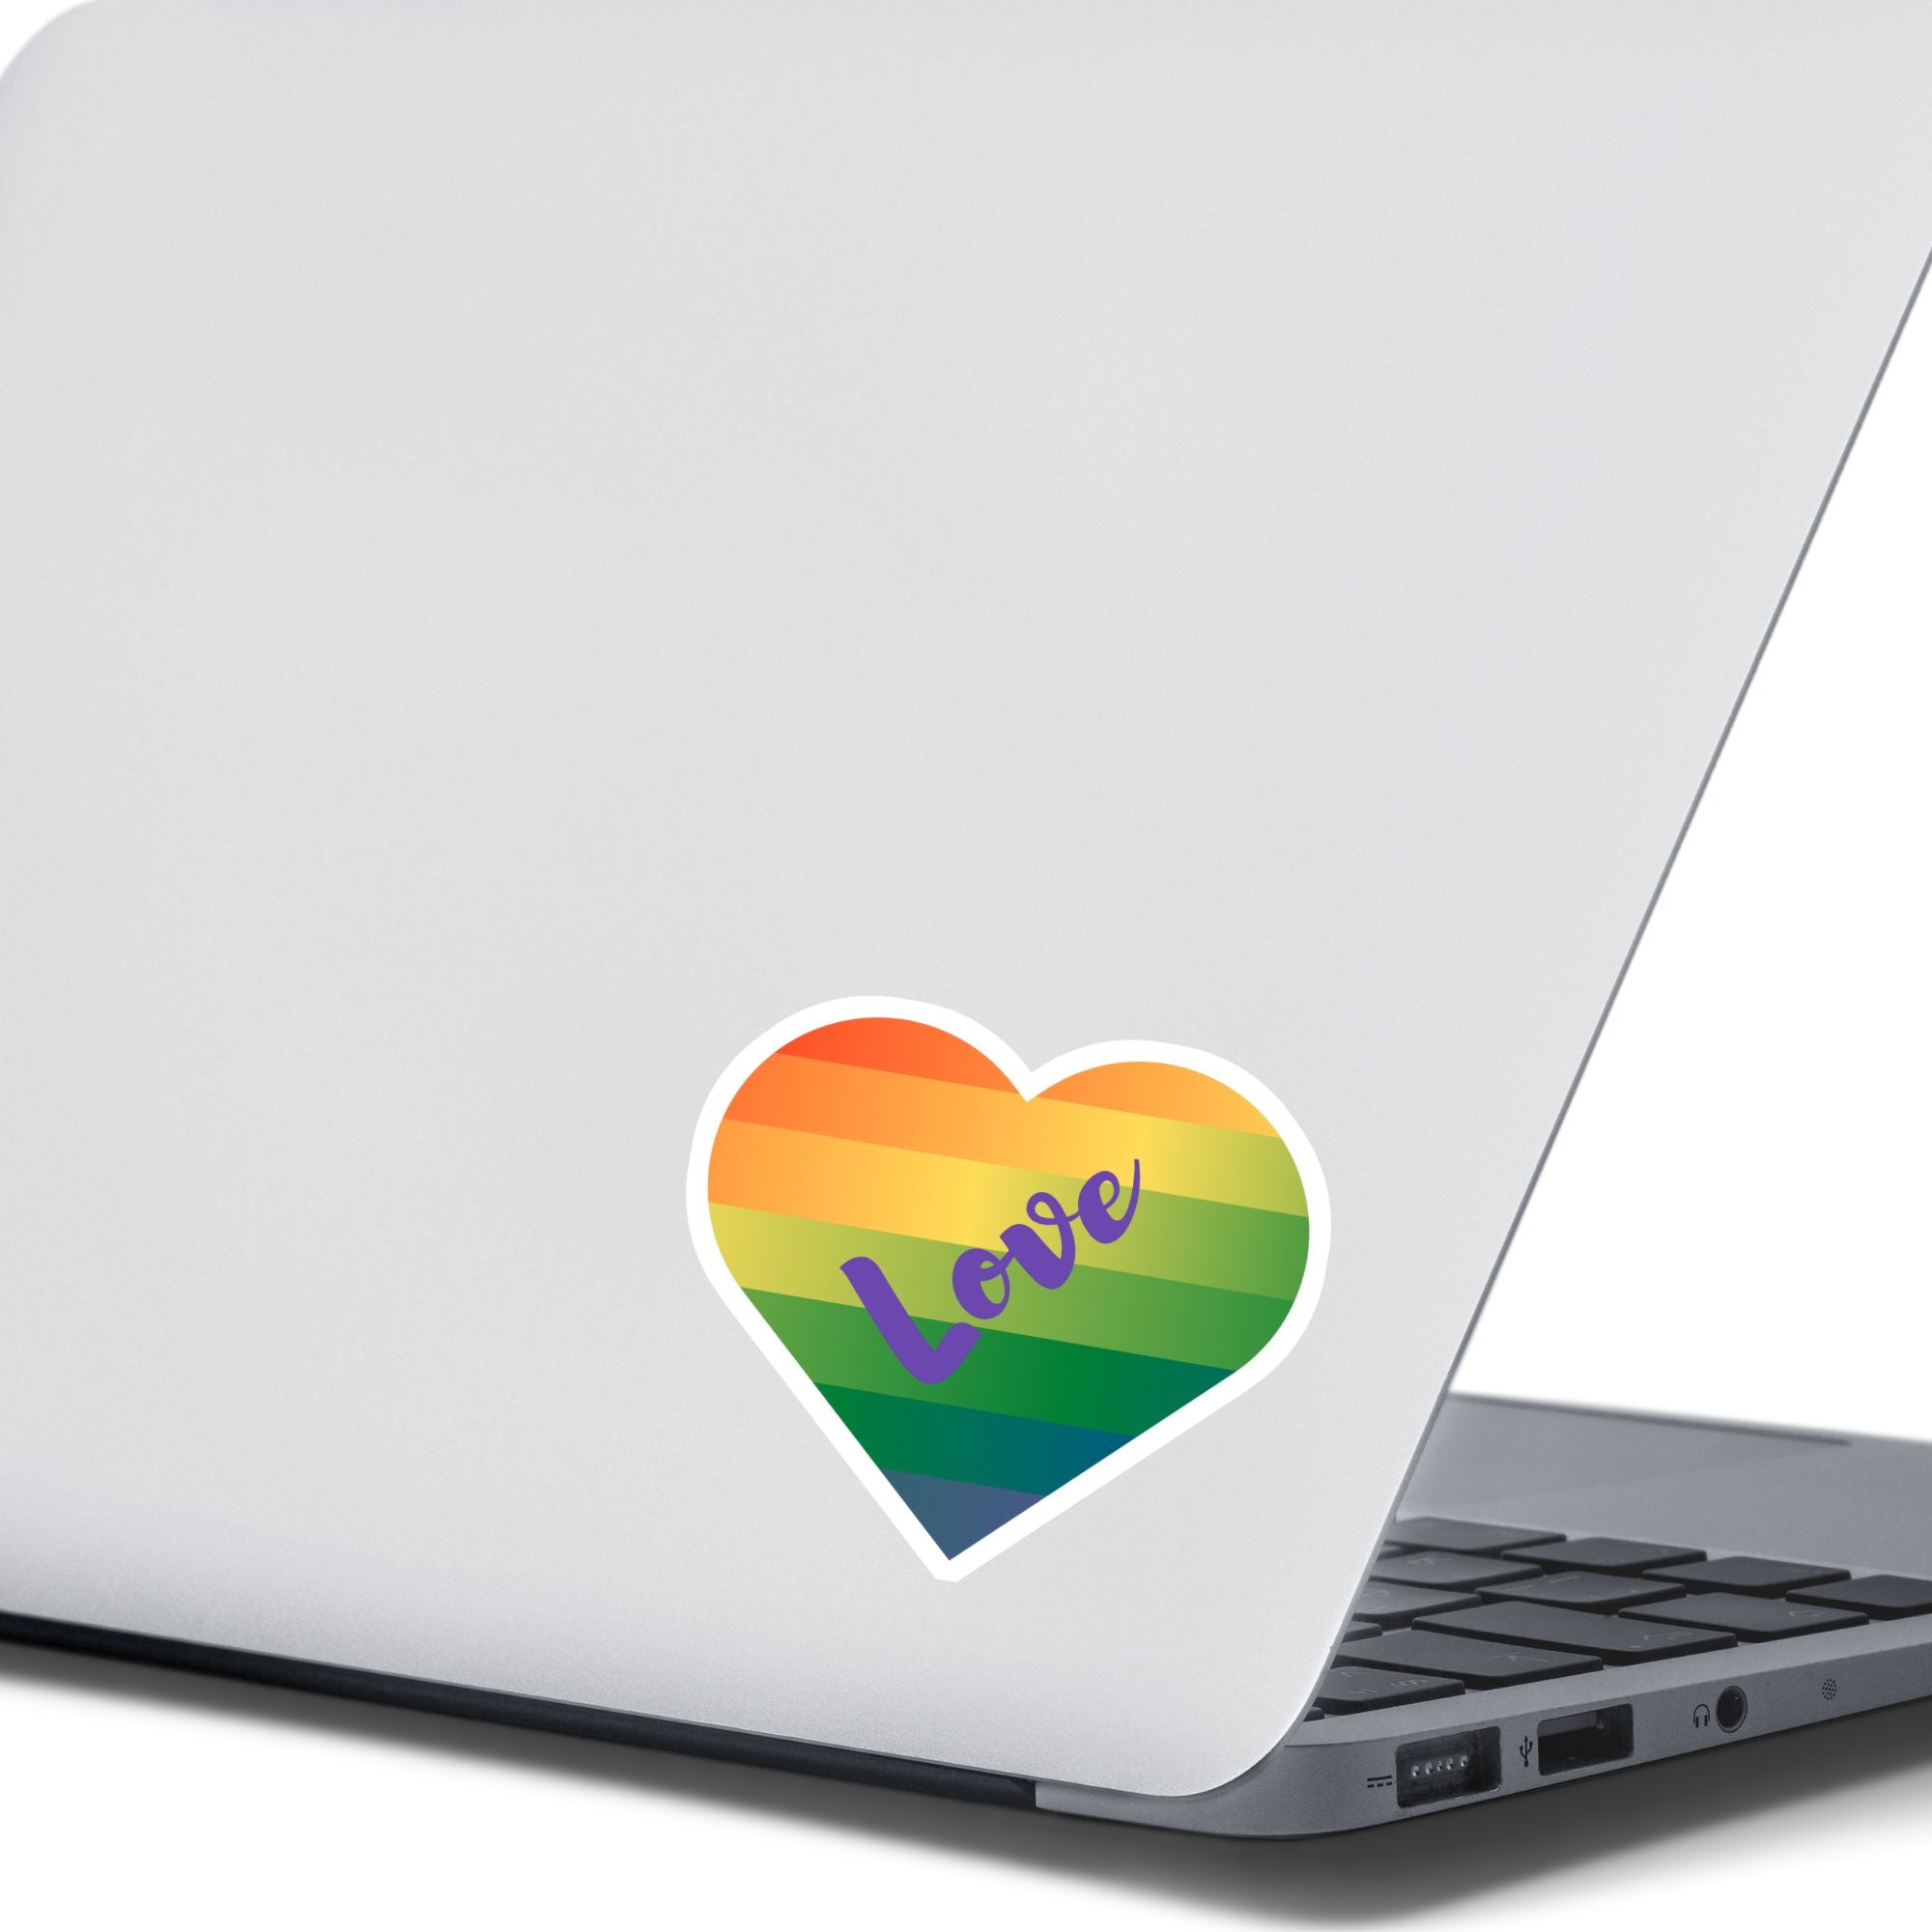 This individual die-cut sticker features a heart shape with graduated colors from orange at the top to blue at the bottom, and the word love written across. Perfect for the people you love! This image shows the Love Heart sticker on the back of an open laptop.